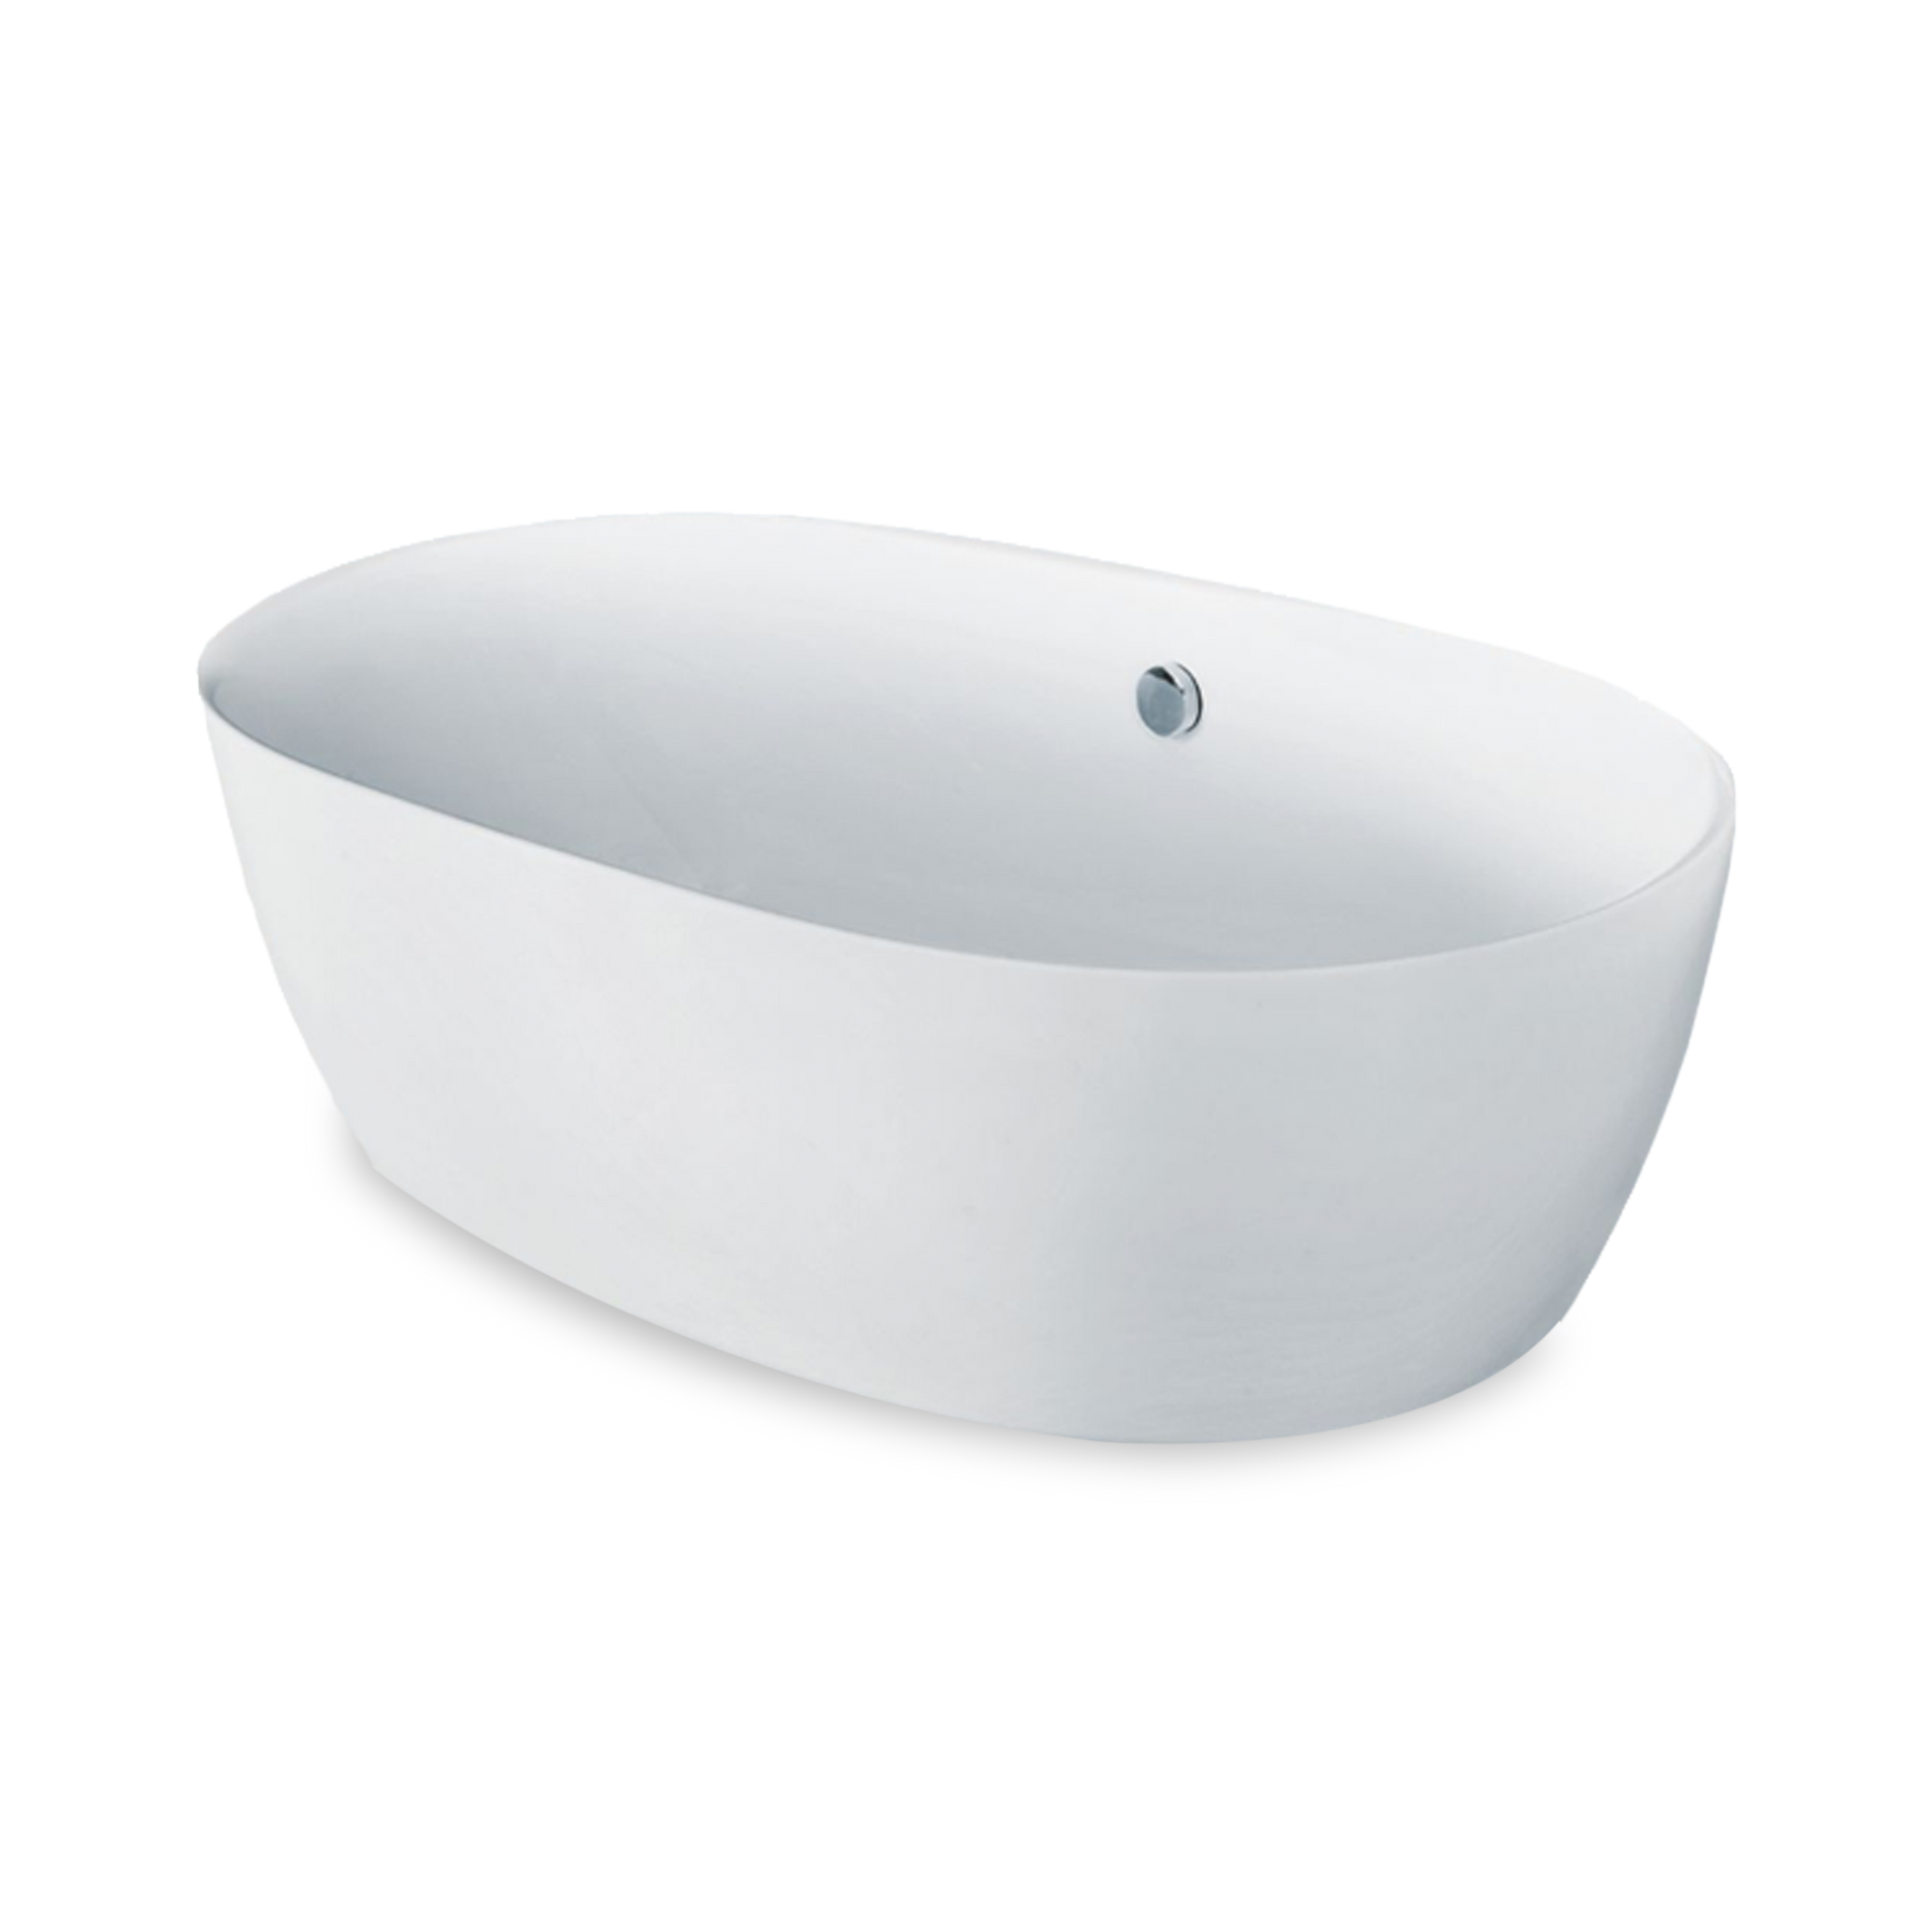 The Tango bath has an organic shape with two asymmetrical sloped backrests, a centre drain and a fine, rounded ledge.